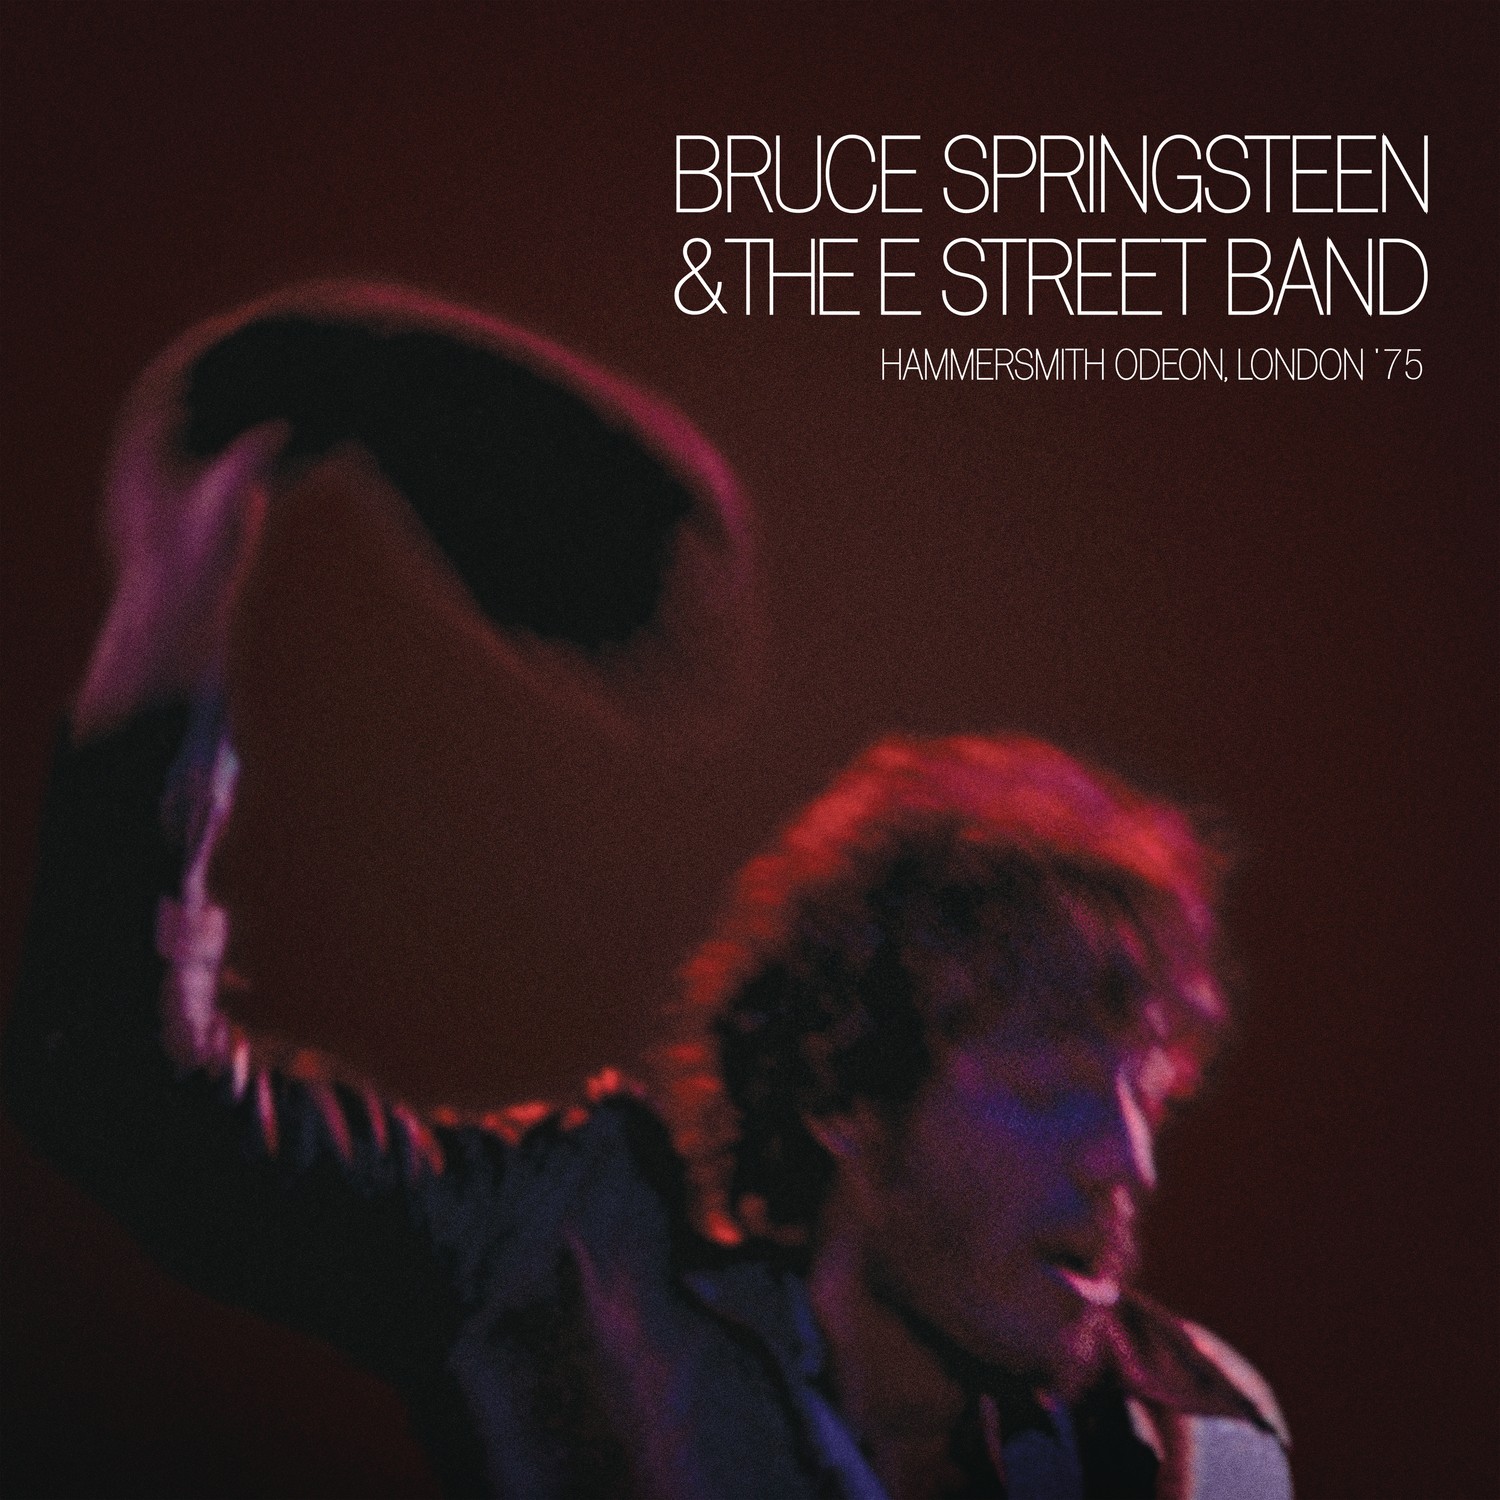 Bruce Springsteen & The E Street Band - Hammersmith Odeon, London '75 4XLP